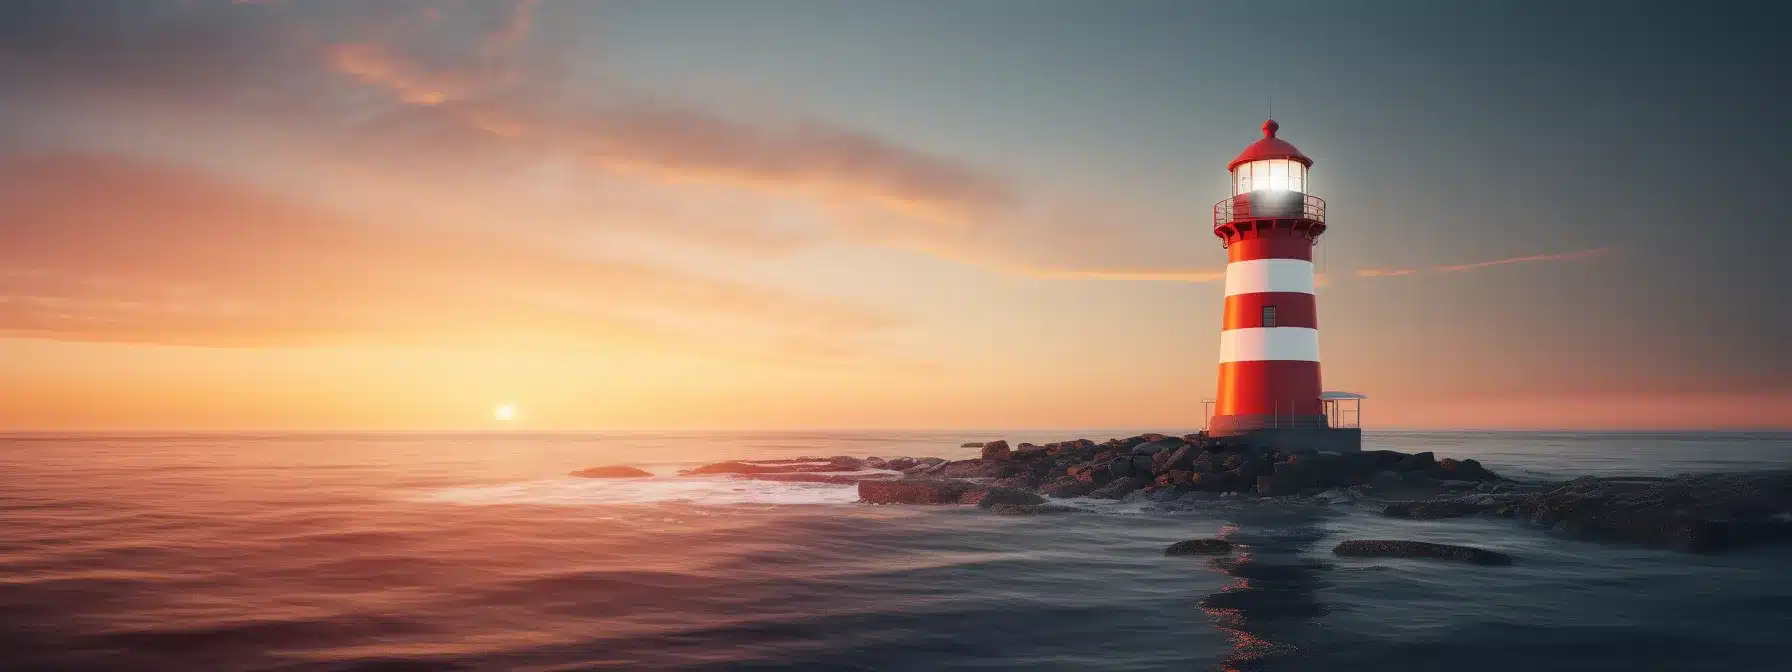 A Lighthouse Beacon Illuminating Various Marketing Channels, Broadcasting Its Brand Presence Across The Vast Ocean Of The Internet.